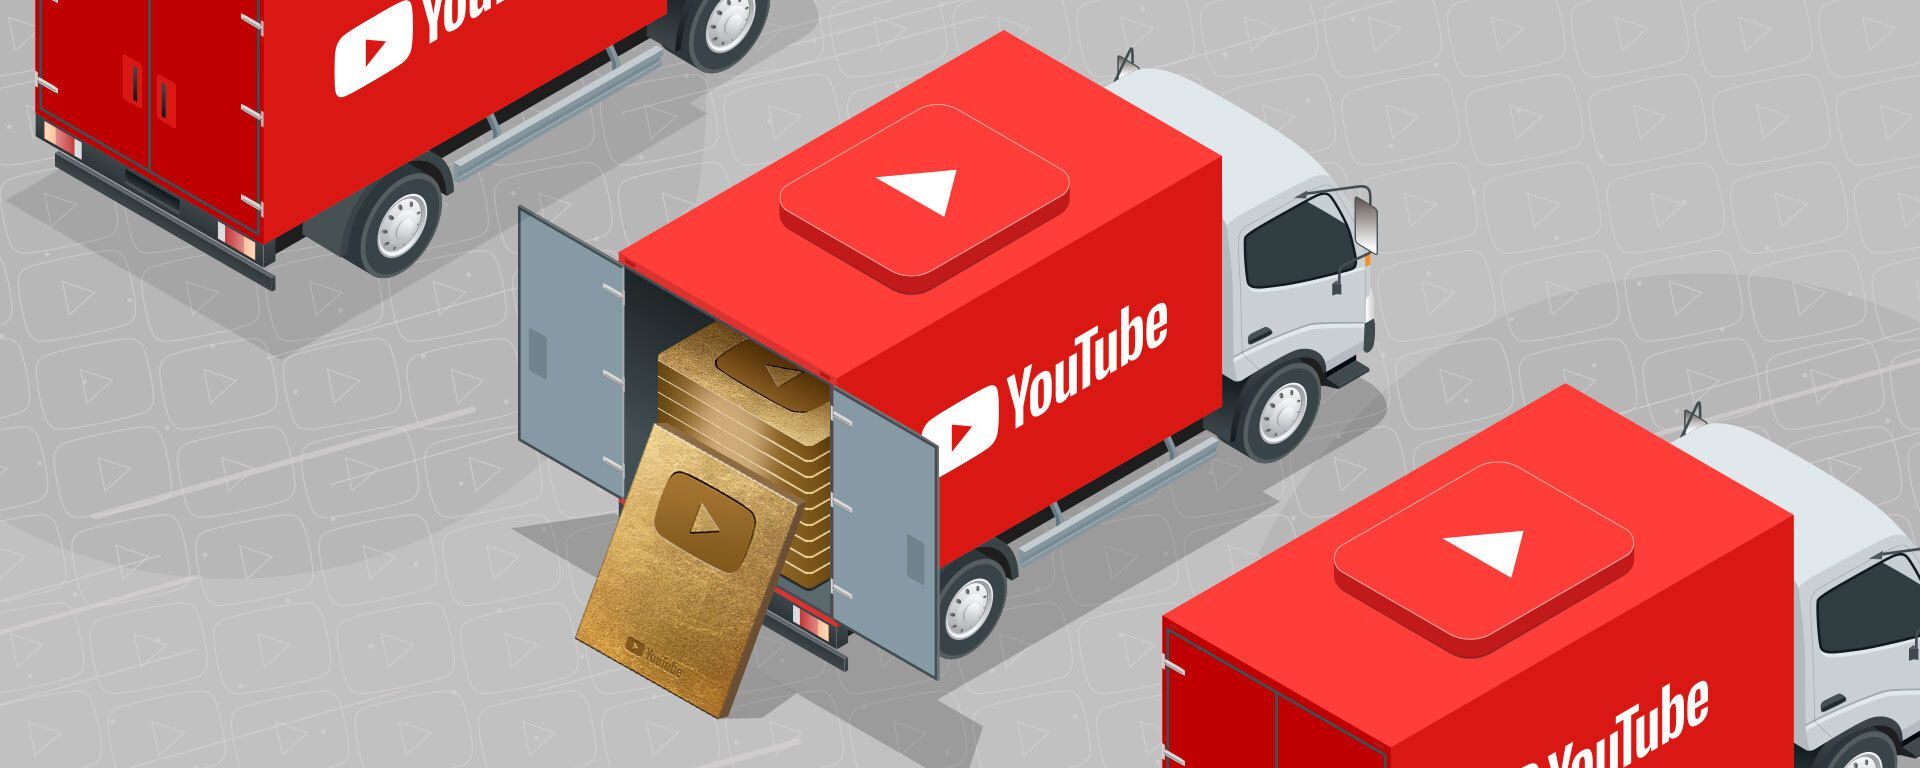 Image showing YouTube branded trucks delivering YouTube Play Buttons to creators.